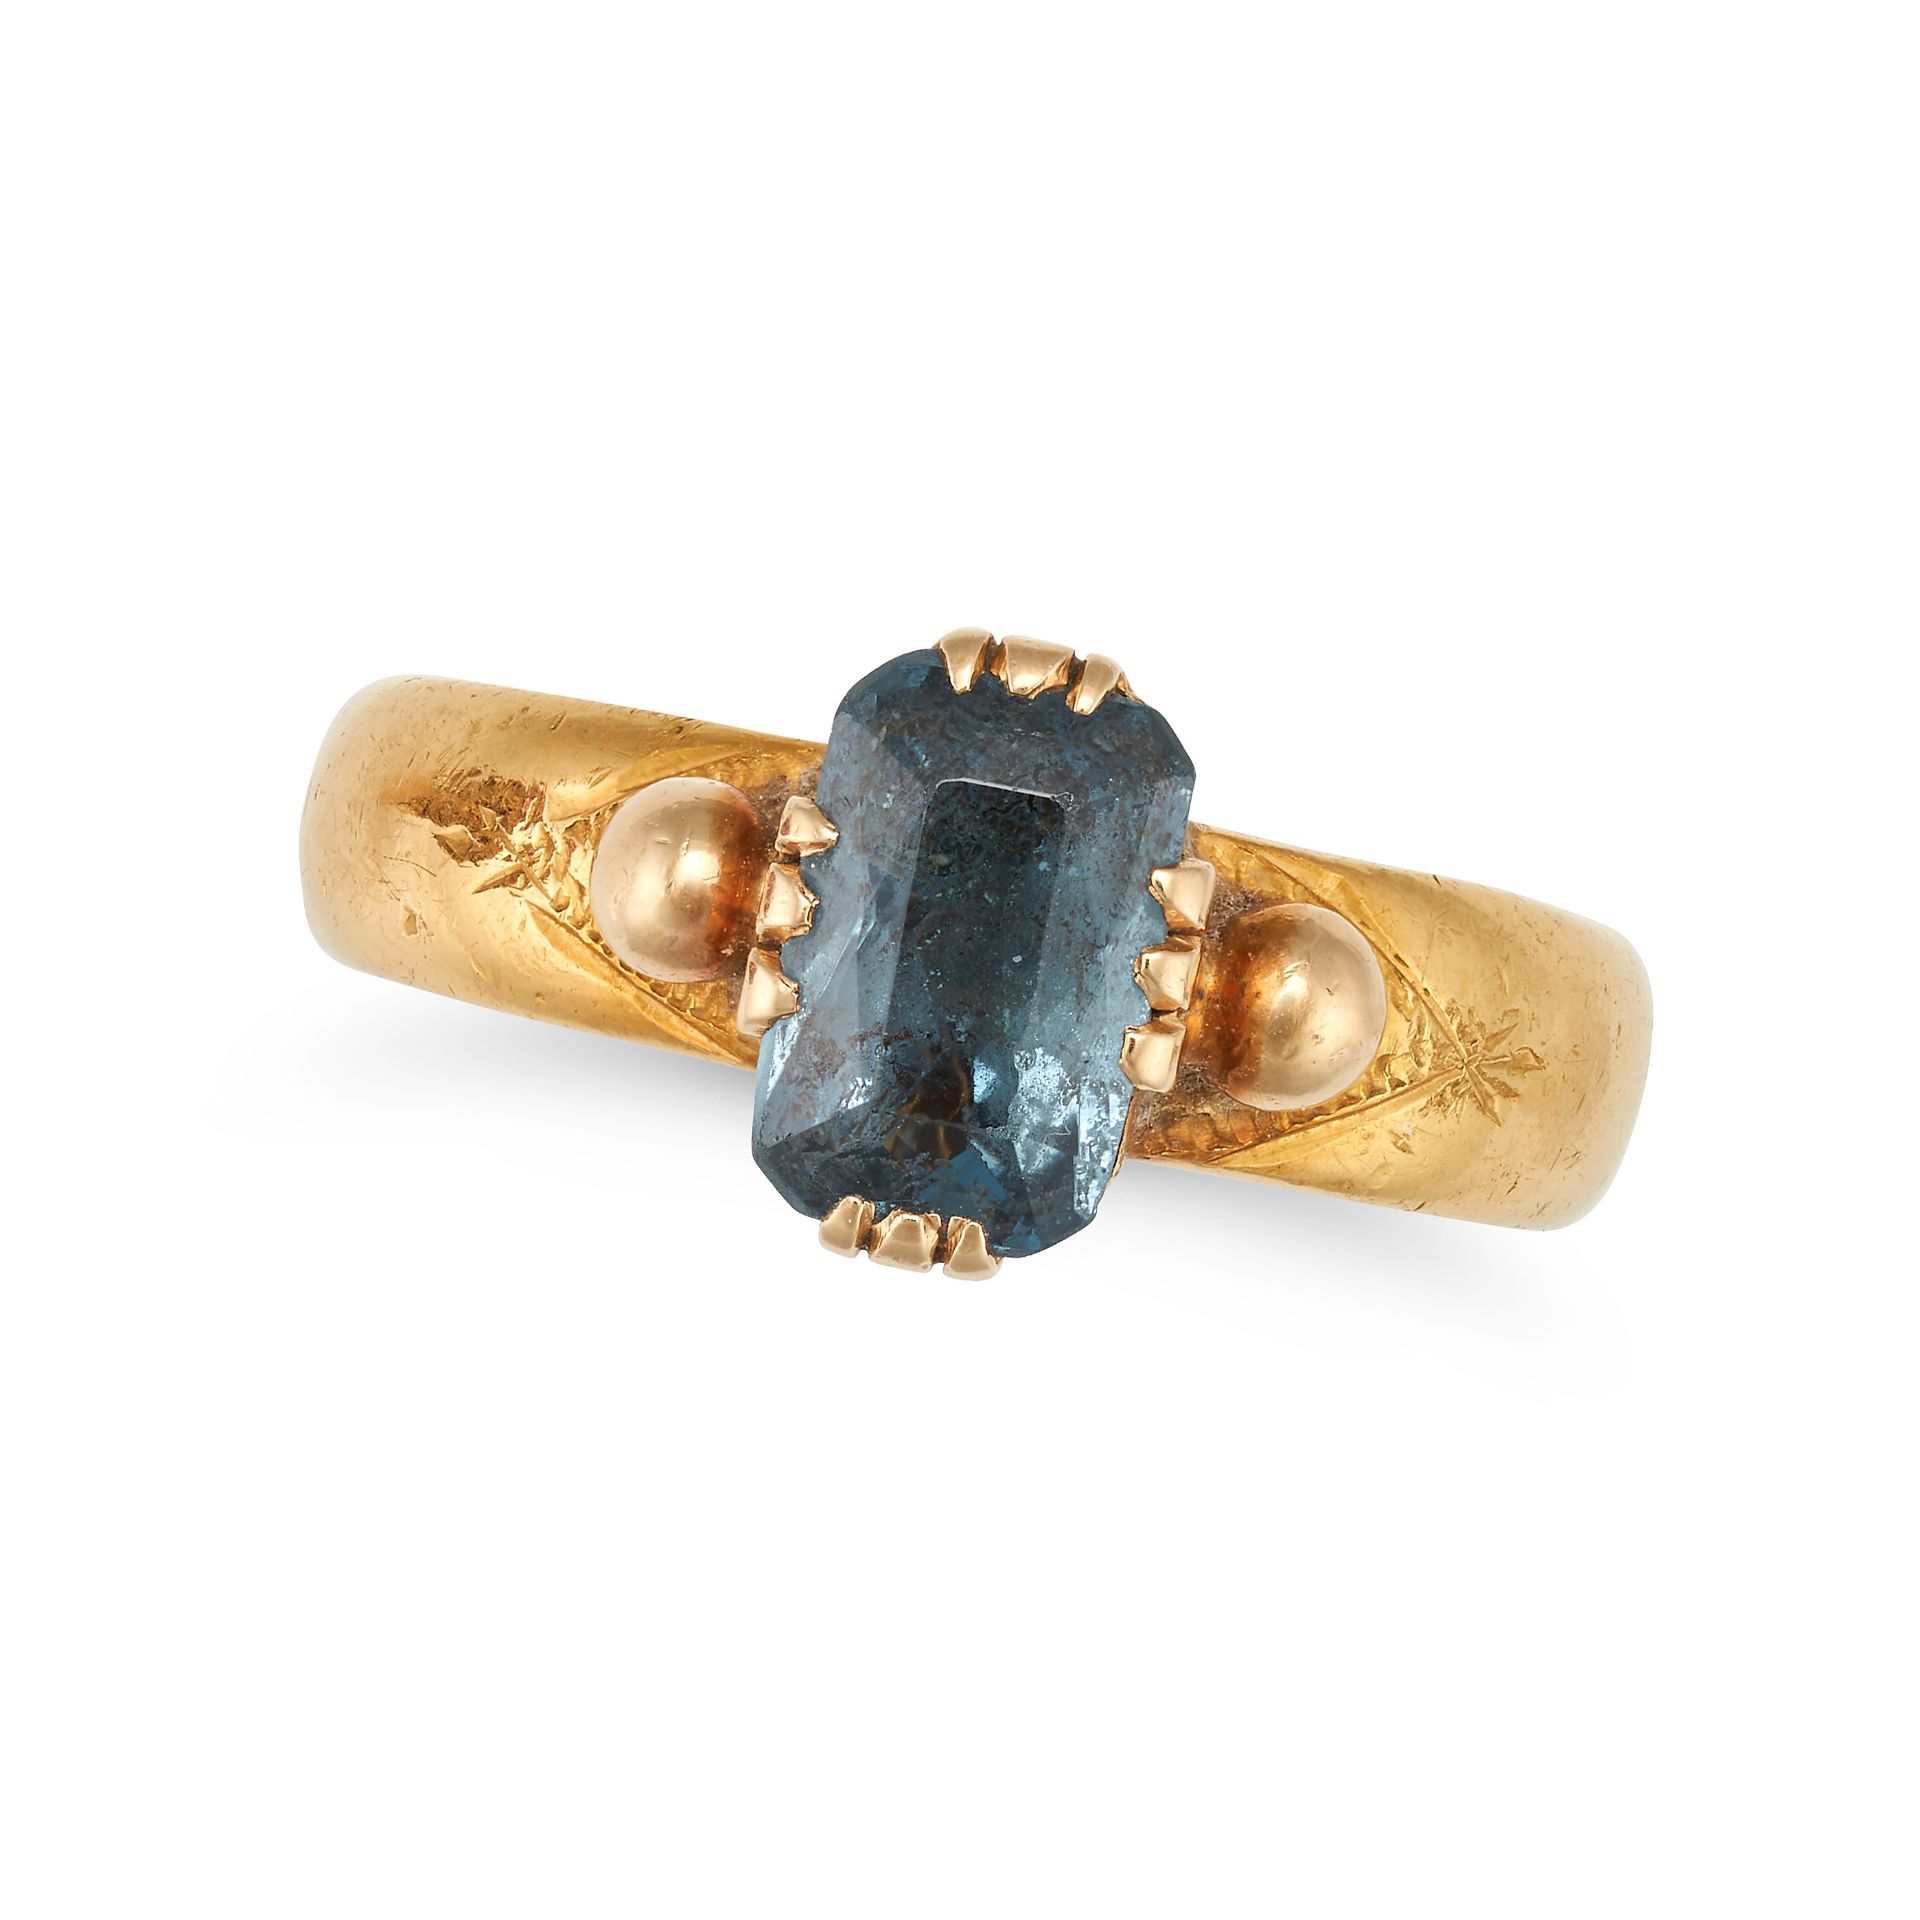 A BLUE SPINEL RING in 23ct yellow gold, set with a cushion cut blue spinel, inscribed 'PL Mor 193...